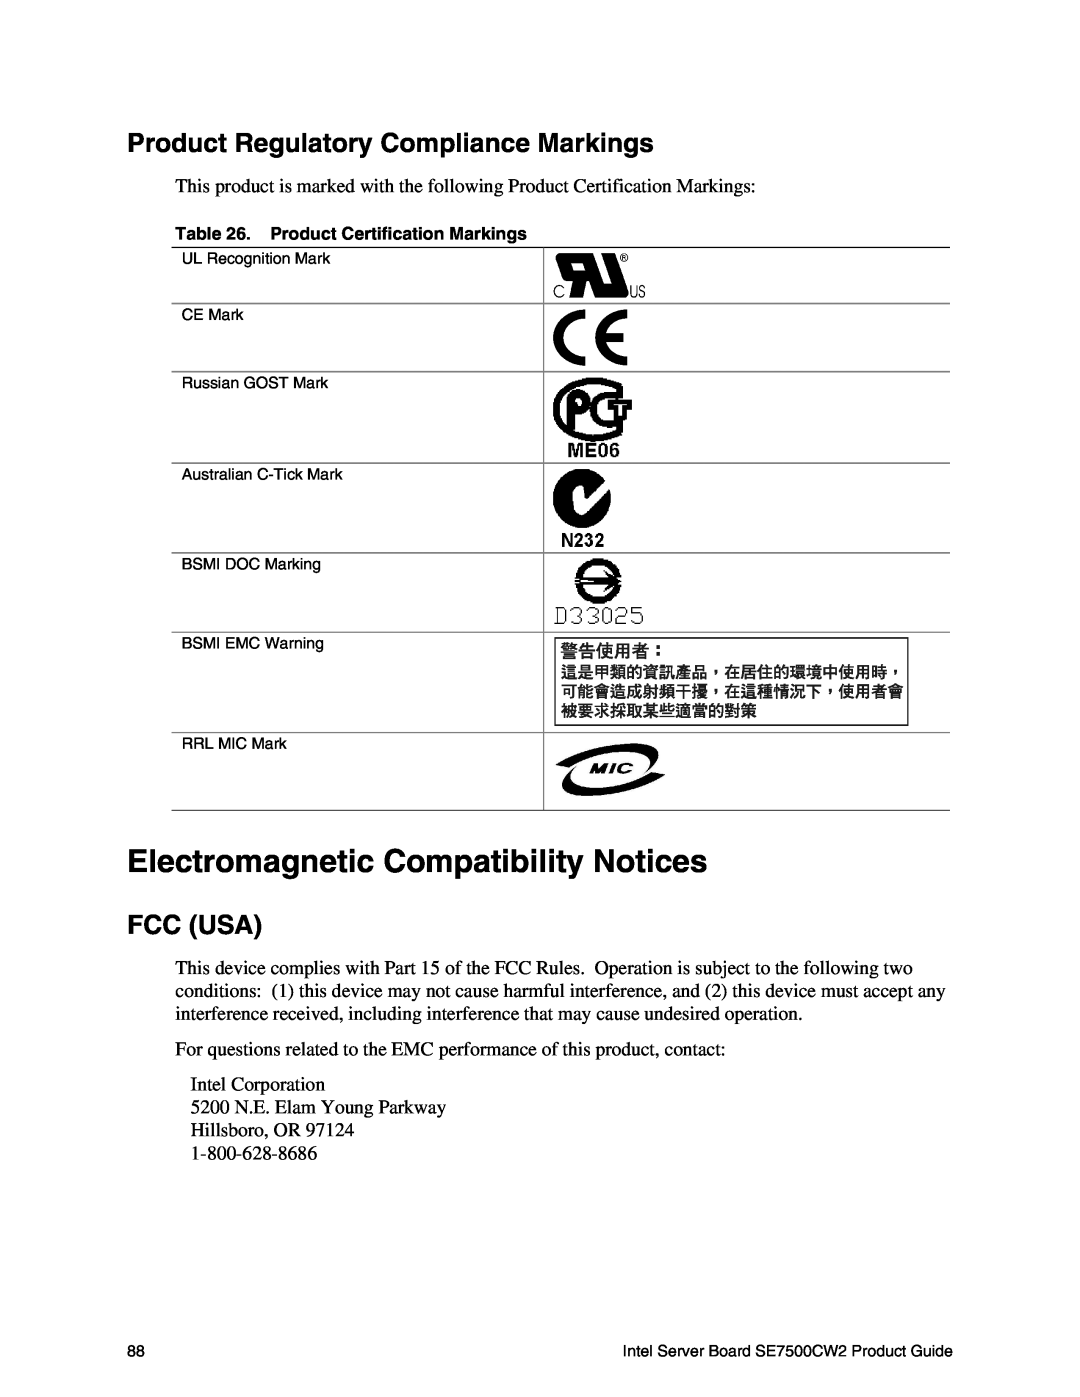 Intel SE7500CW2 manual Electromagnetic Compatibility Notices, Product Regulatory Compliance Markings, Fcc Usa 